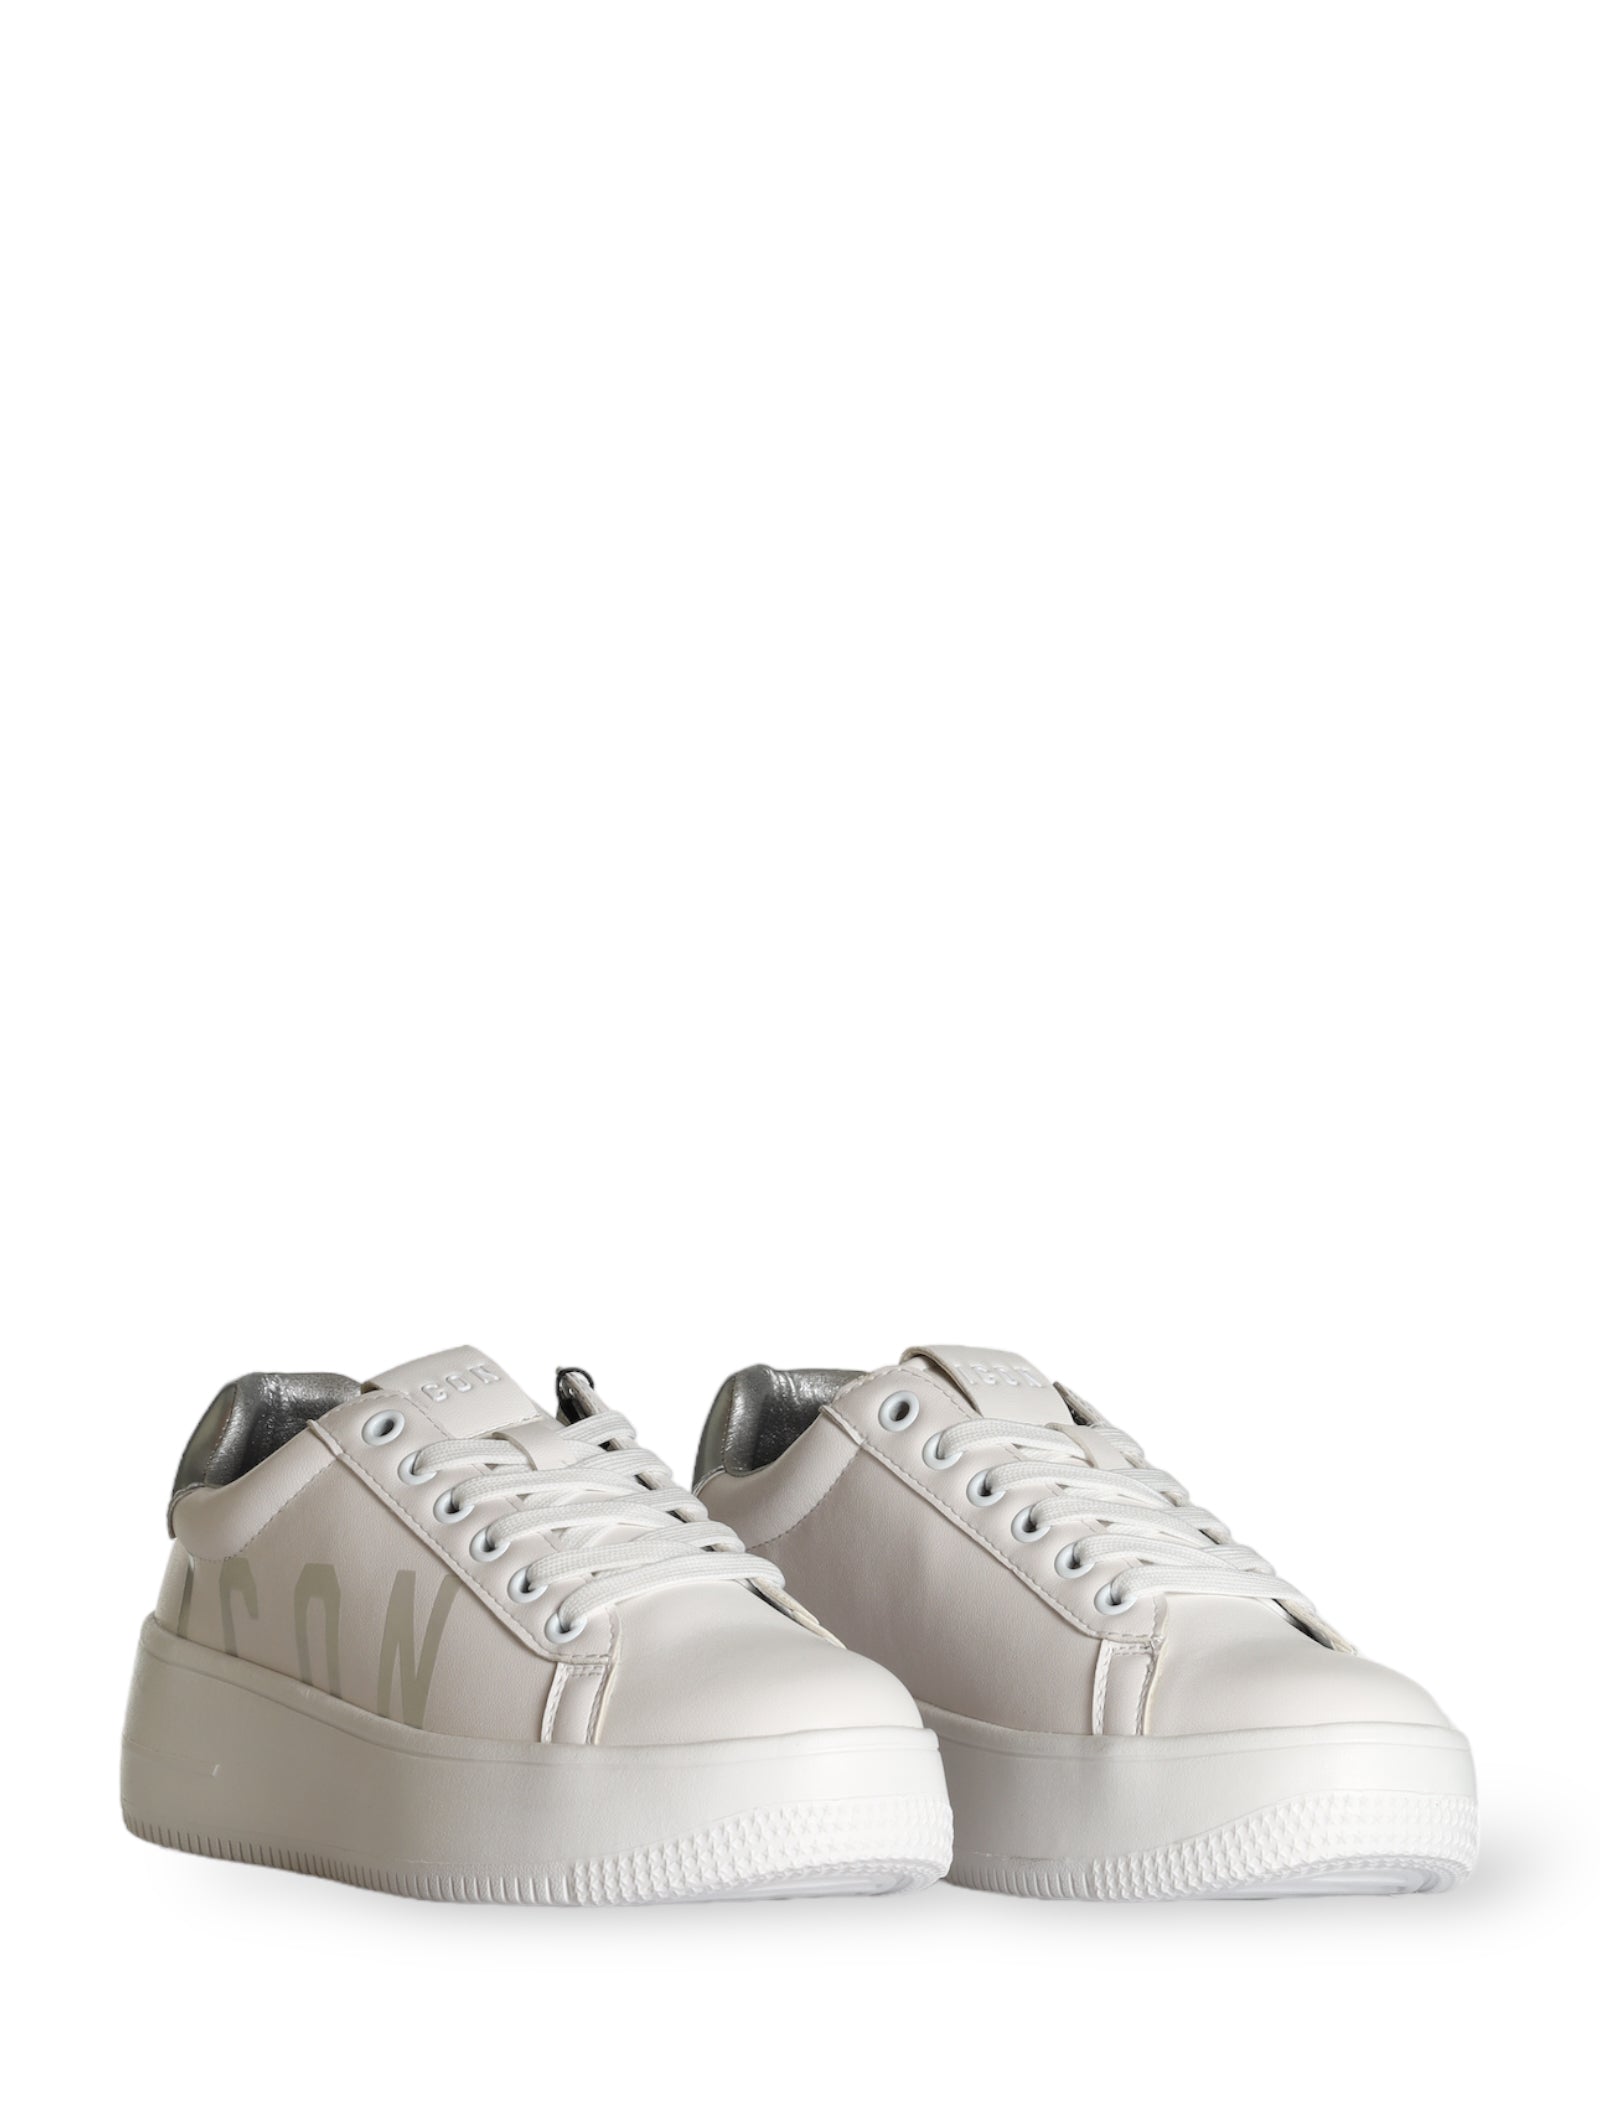 Sneakers Ic948107sd White